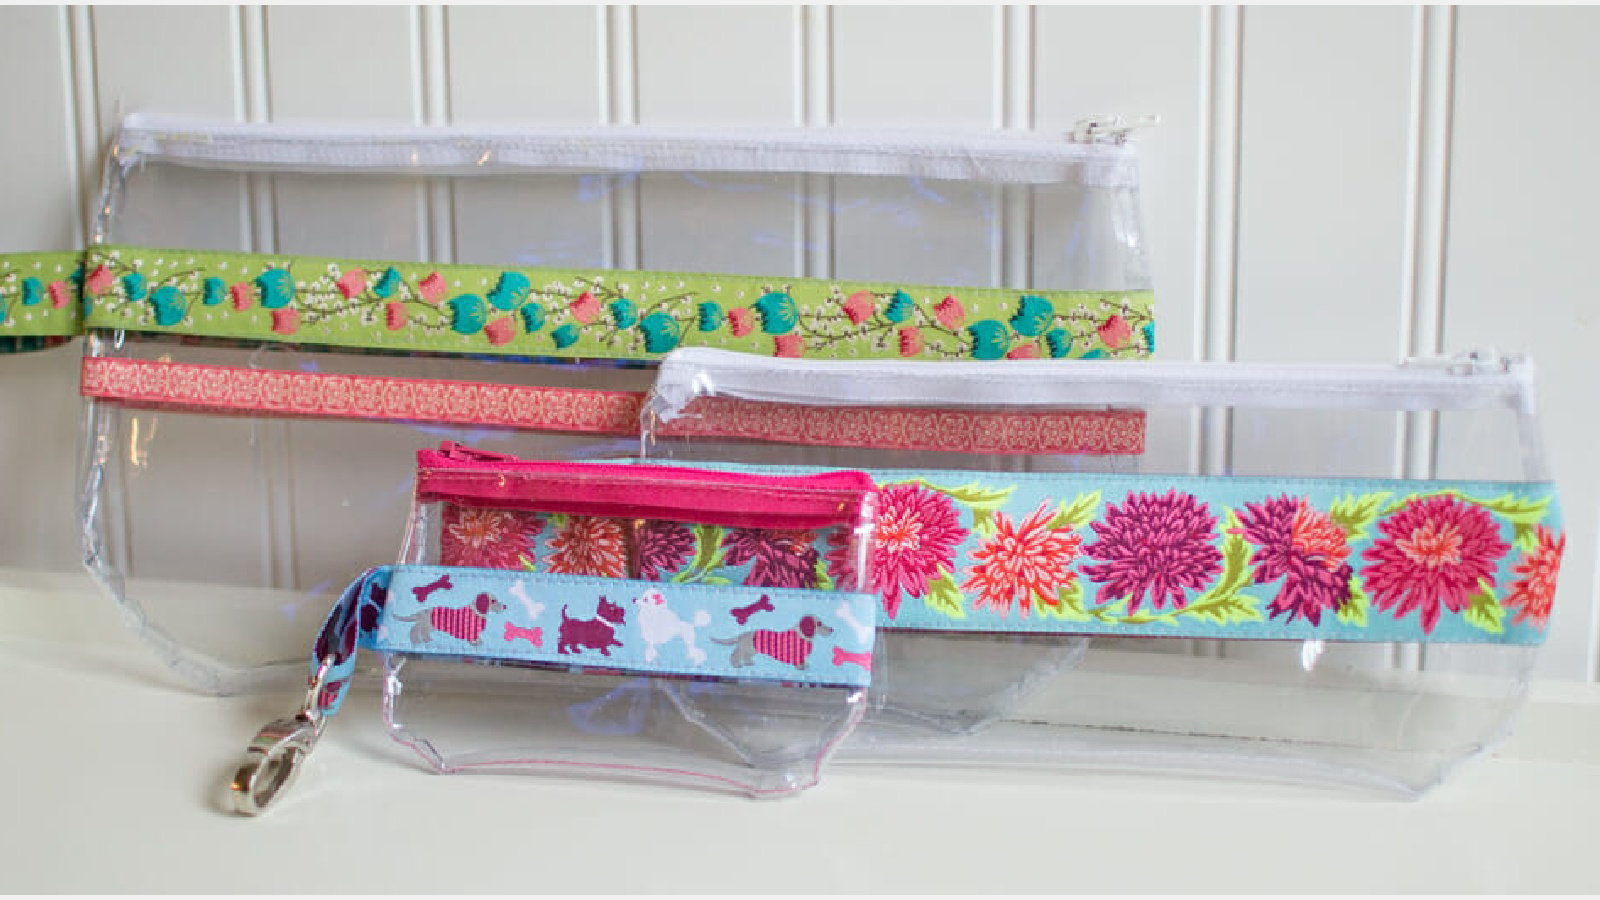 <p>Lots of people ask for see-through zipper bags for travel, and this <a href="https://sewcanshe.com/2014-8-17-ribbon-and-vinyl-zipper-pouches-free-tutorial/" rel="noreferrer noopener">Ribbon and Vinyl Zipper Pouch Pattern</a> is the easist one. </p><p>If you are worried about sewing on the vinyl… <em>don’t be!  </em>The tutorial contains a great technique for using tissue paper so the vinyl will move smoothly across your sewing machine bed. You might like these <a href="https://www.sewcanshe.com/blog/tips-for-sewing-on-vinyl?rq=sewing%20with%20vinyl" rel="noreferrer noopener">Tips for Sewing on Vinyl.</a></p>